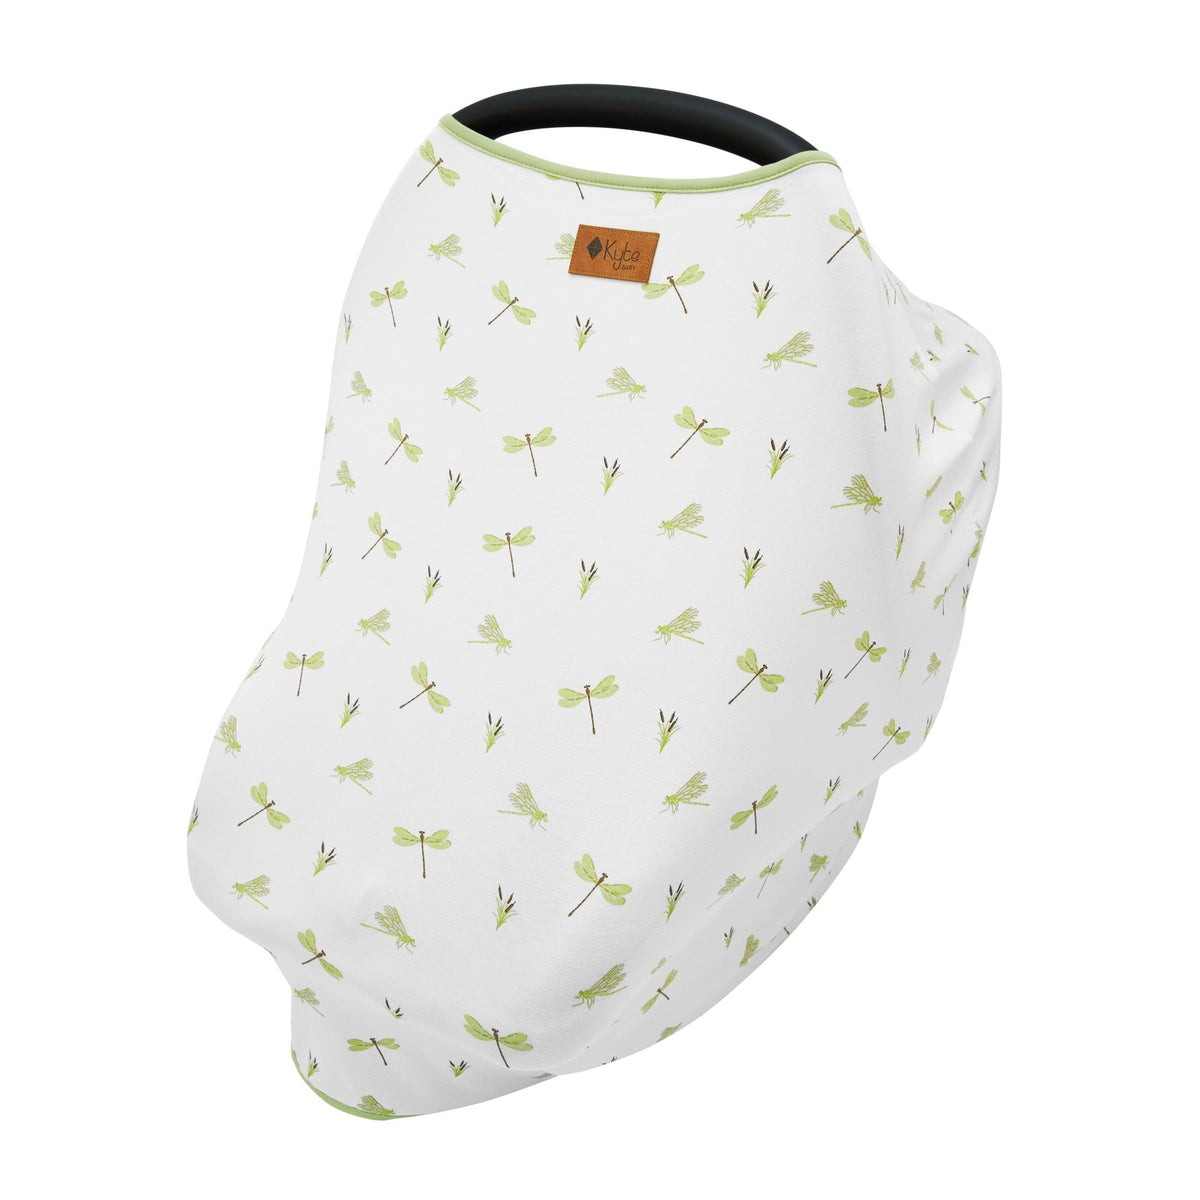 Kyte BABY Car Seat Cover Dragonfly Car Seat Cover in Dragonfly